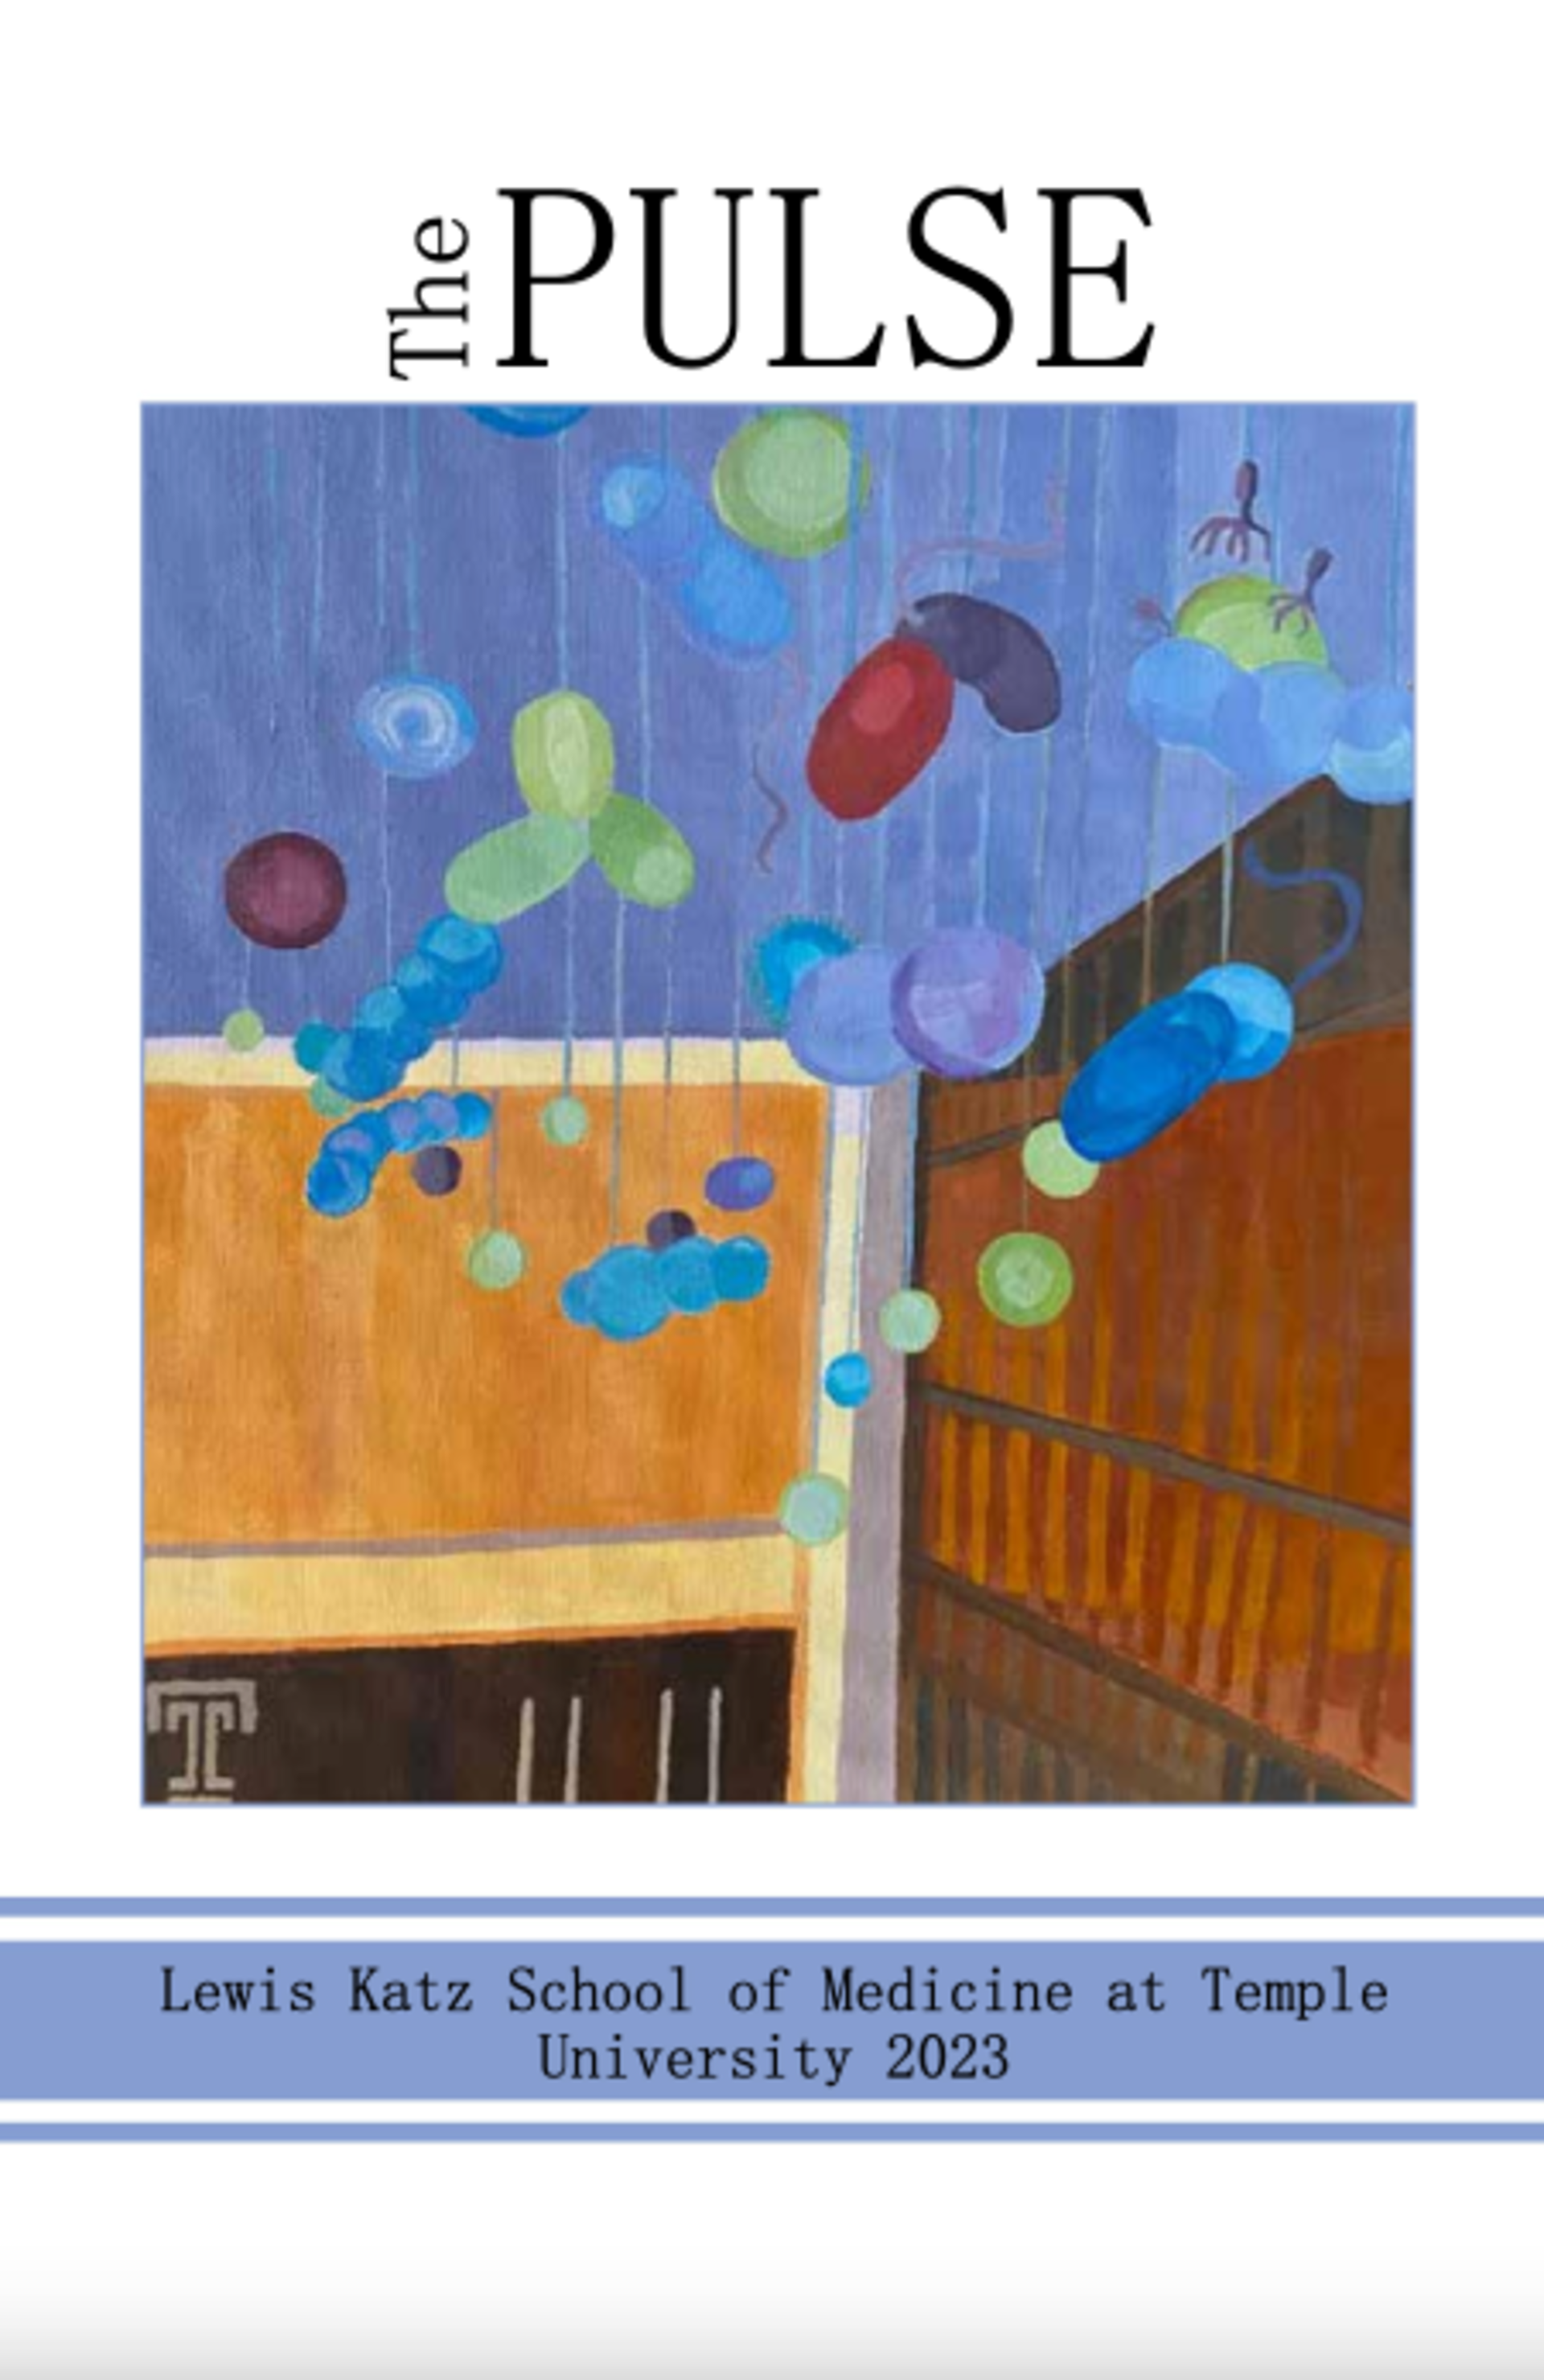 The cover of The Pulse LKSOM 2023 magazine with painting of modules of genes hanging from the ceiling